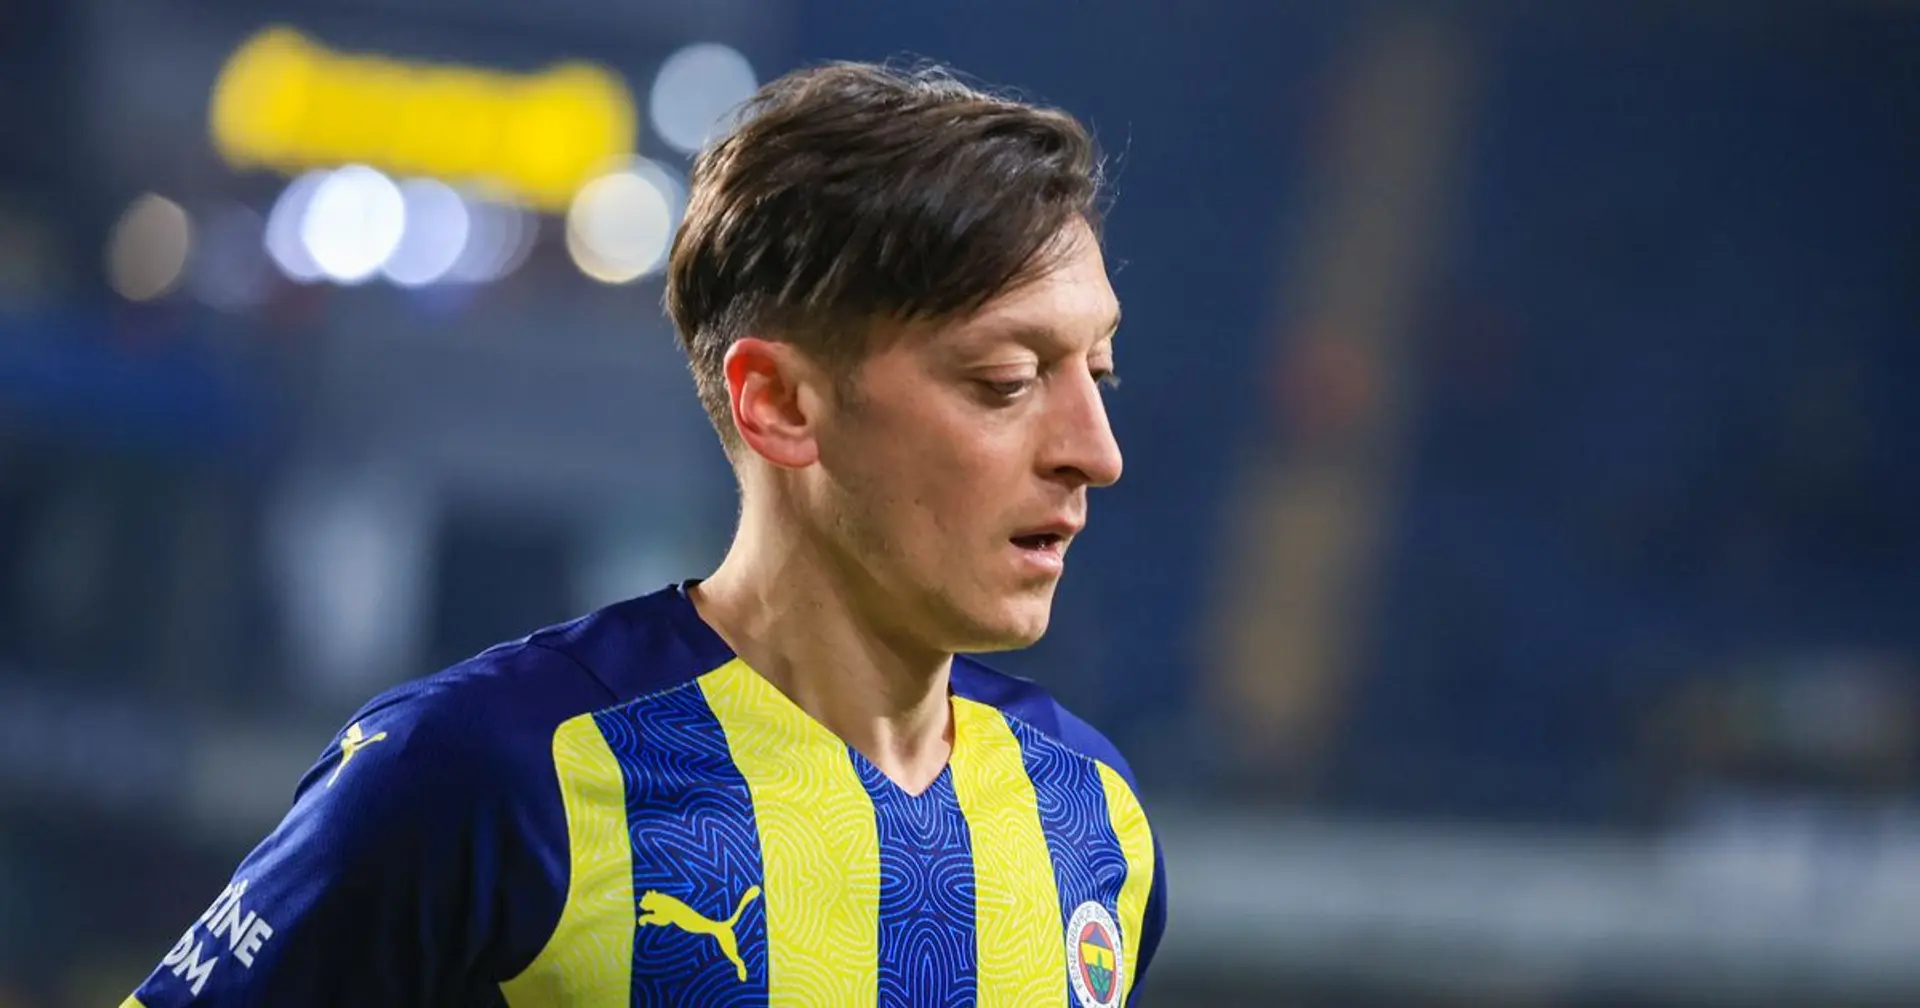 Confirmed: Mesut Ozil's stance on future after being frozen out at Fenerbahce